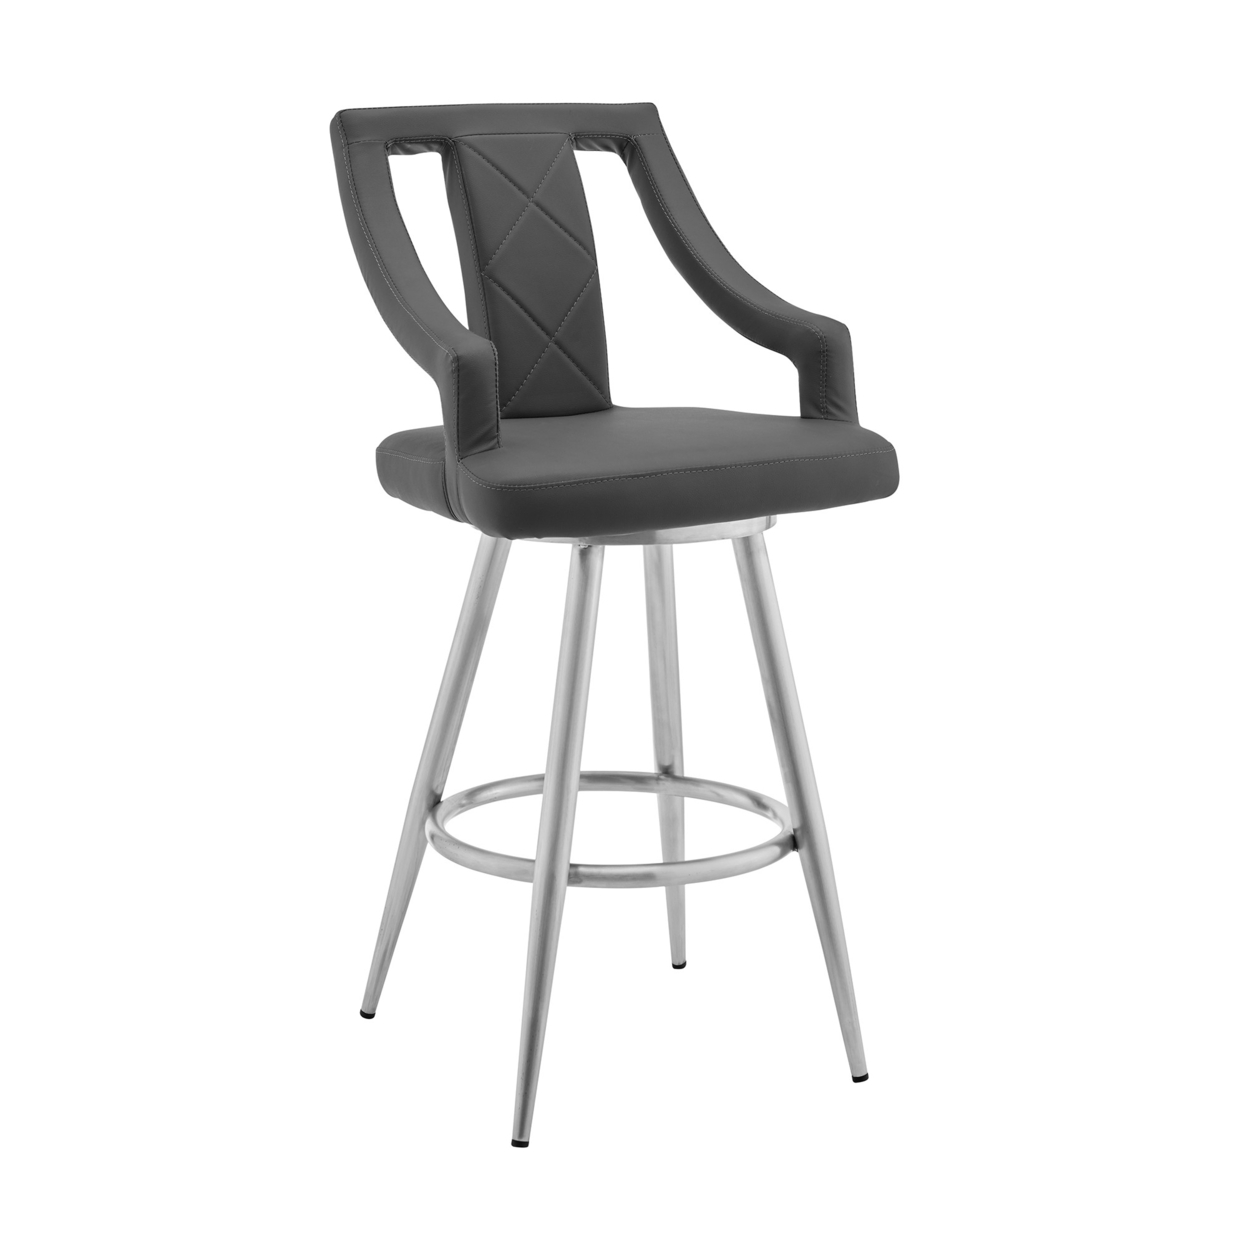 Maxen 30 Gray Faux Leather And Brushed Stainless Steel Swivel Bar Stool- Saltoro Sherpi